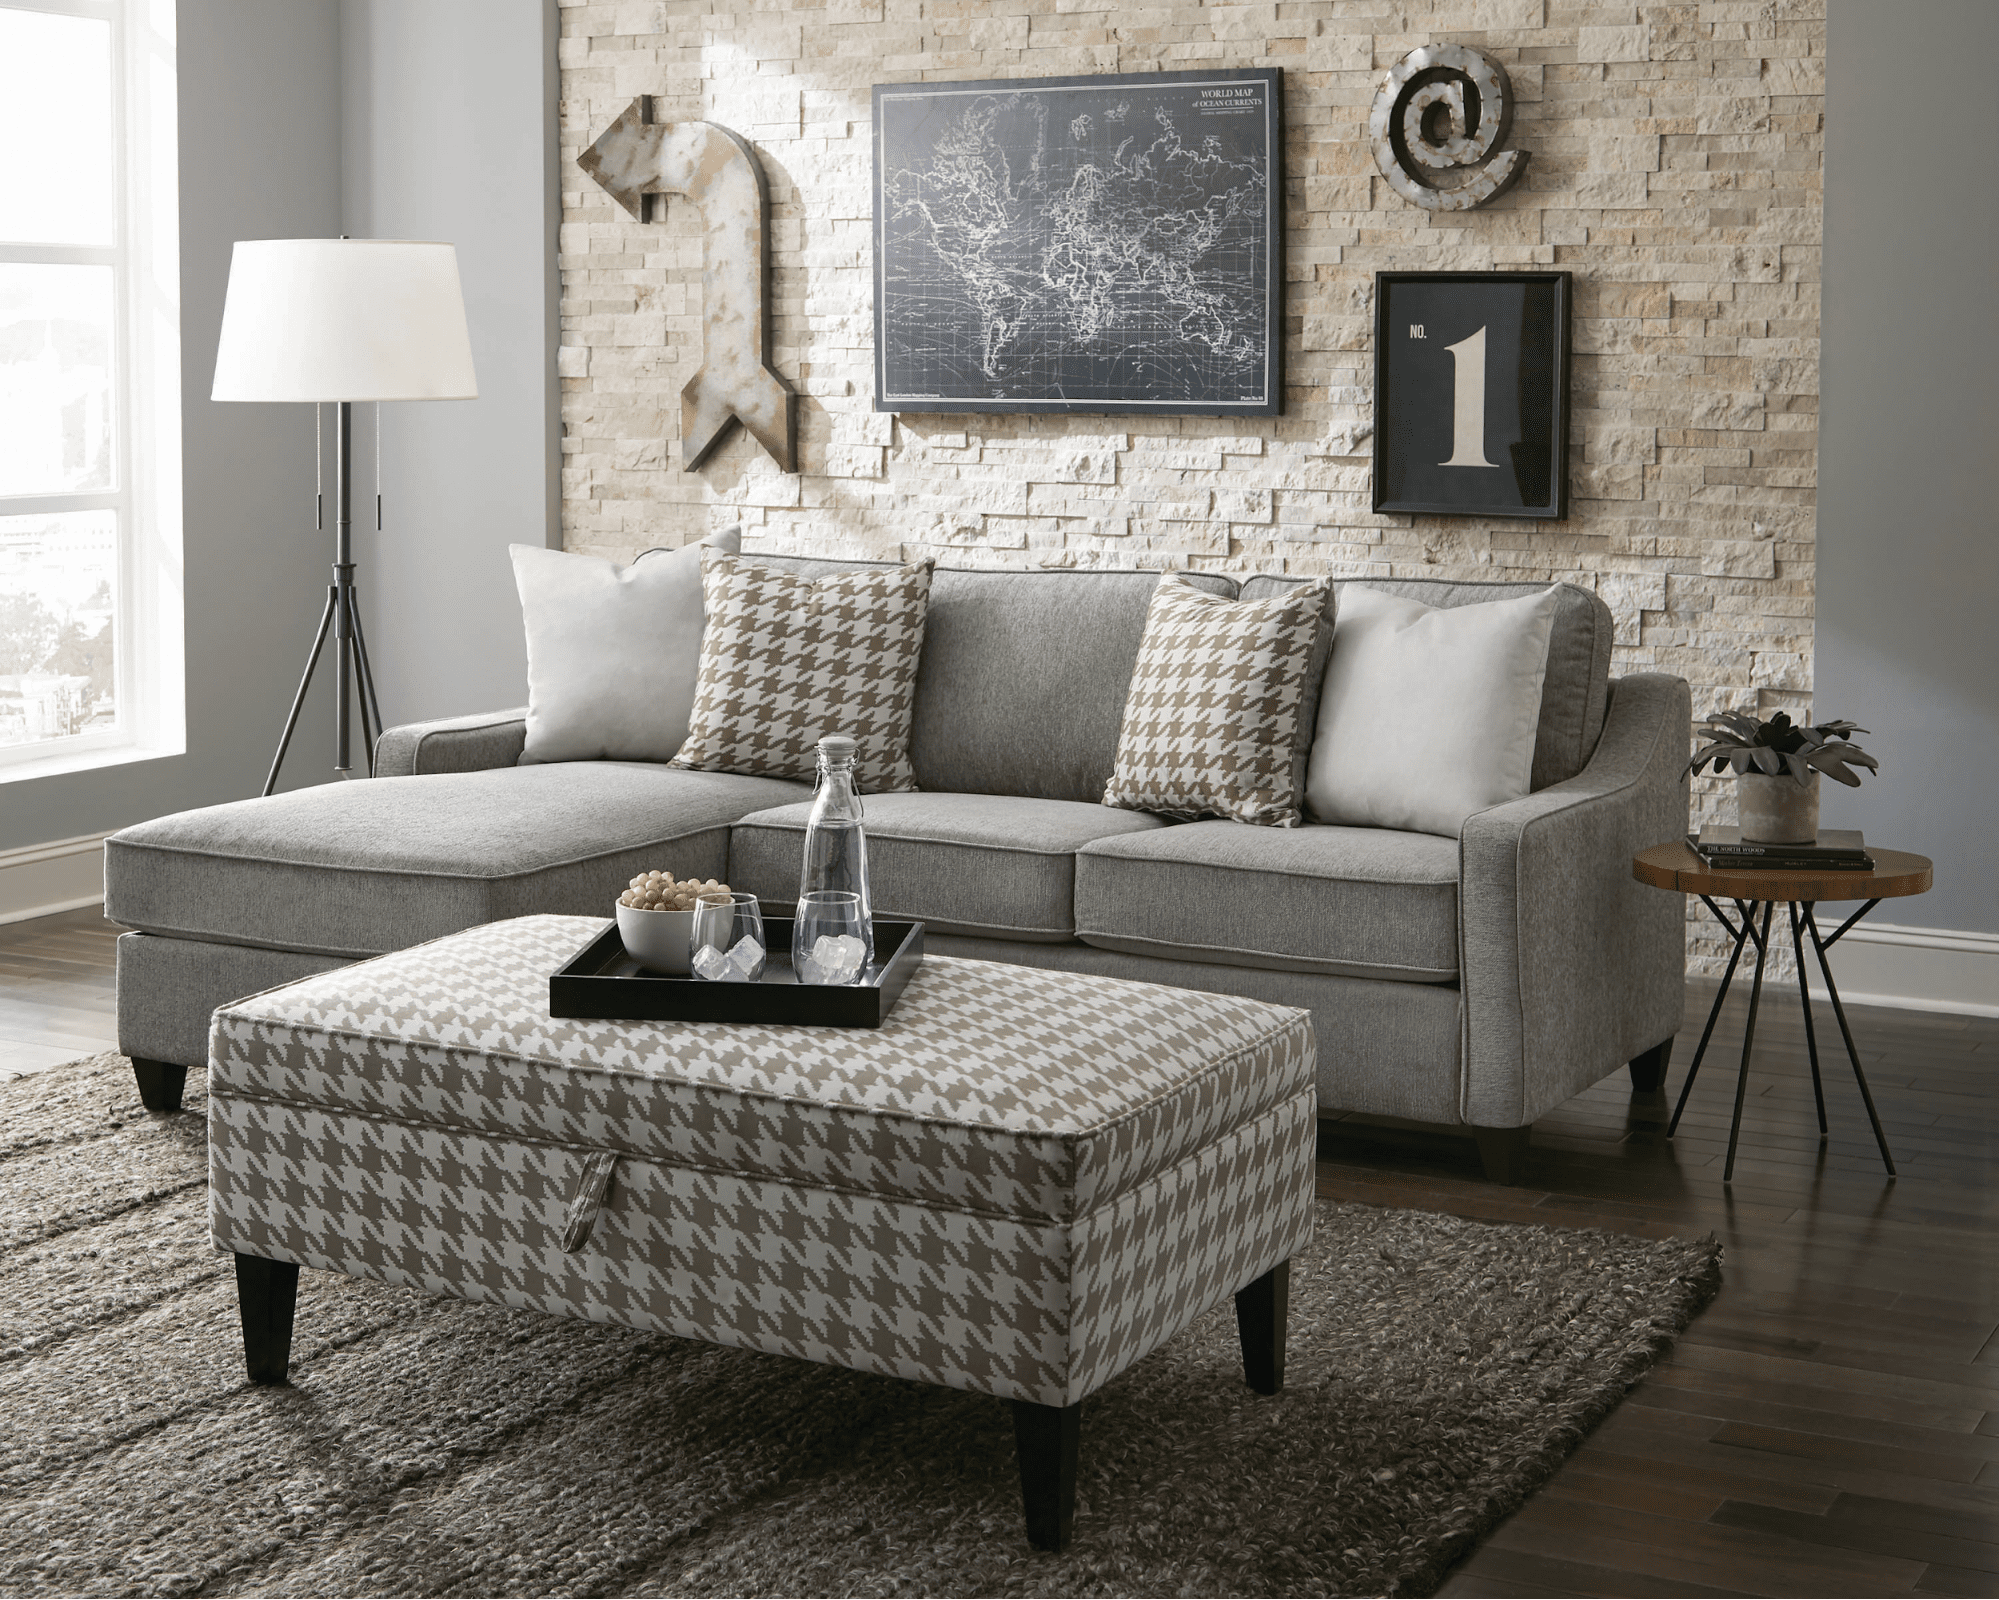 How To Pick A Small Sectional Sofa For A Small Space – Coast Throughout Sofas For Small Spaces (View 8 of 15)